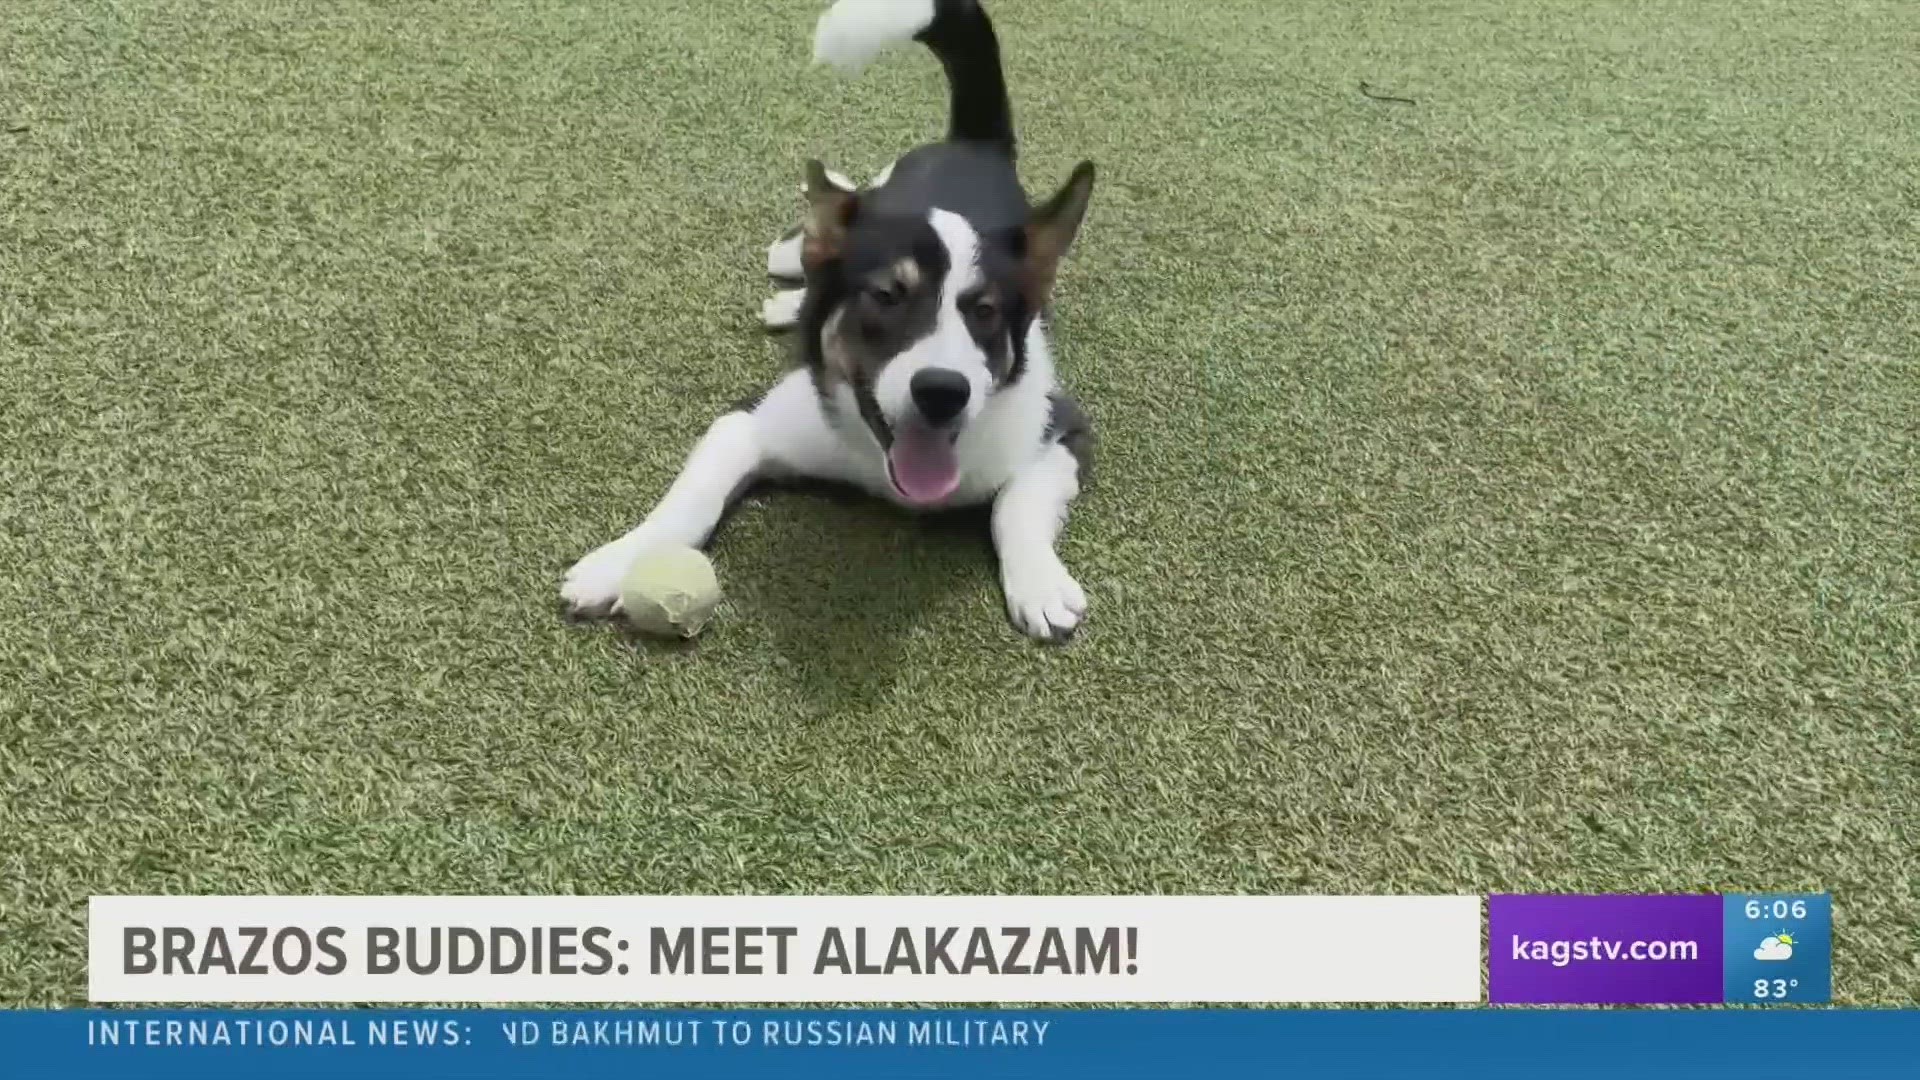 This week's featured Brazos Buddy is Alakazam, a two-year-old Husky-Heeler mix that's looking to be adopted into a new home.